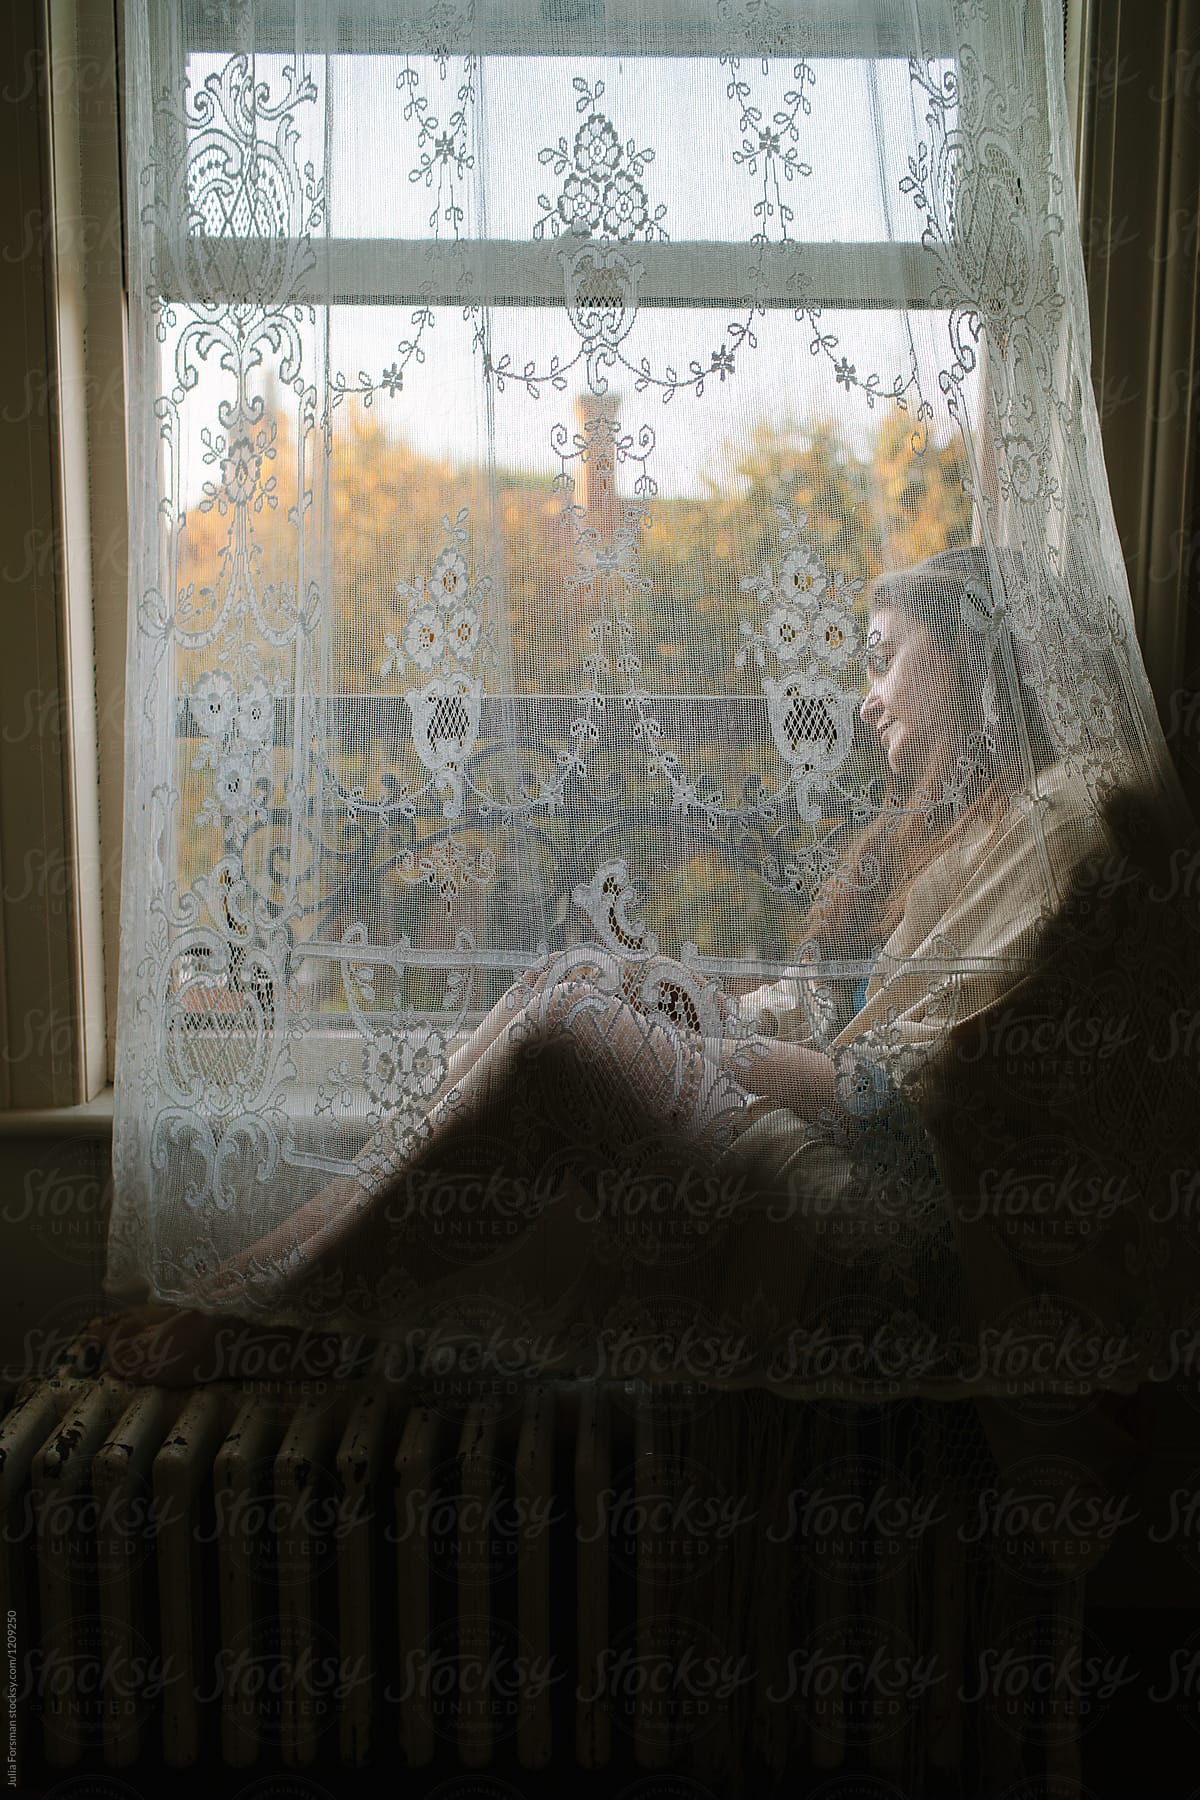 Woman sitting by a window behind a lace curtain.